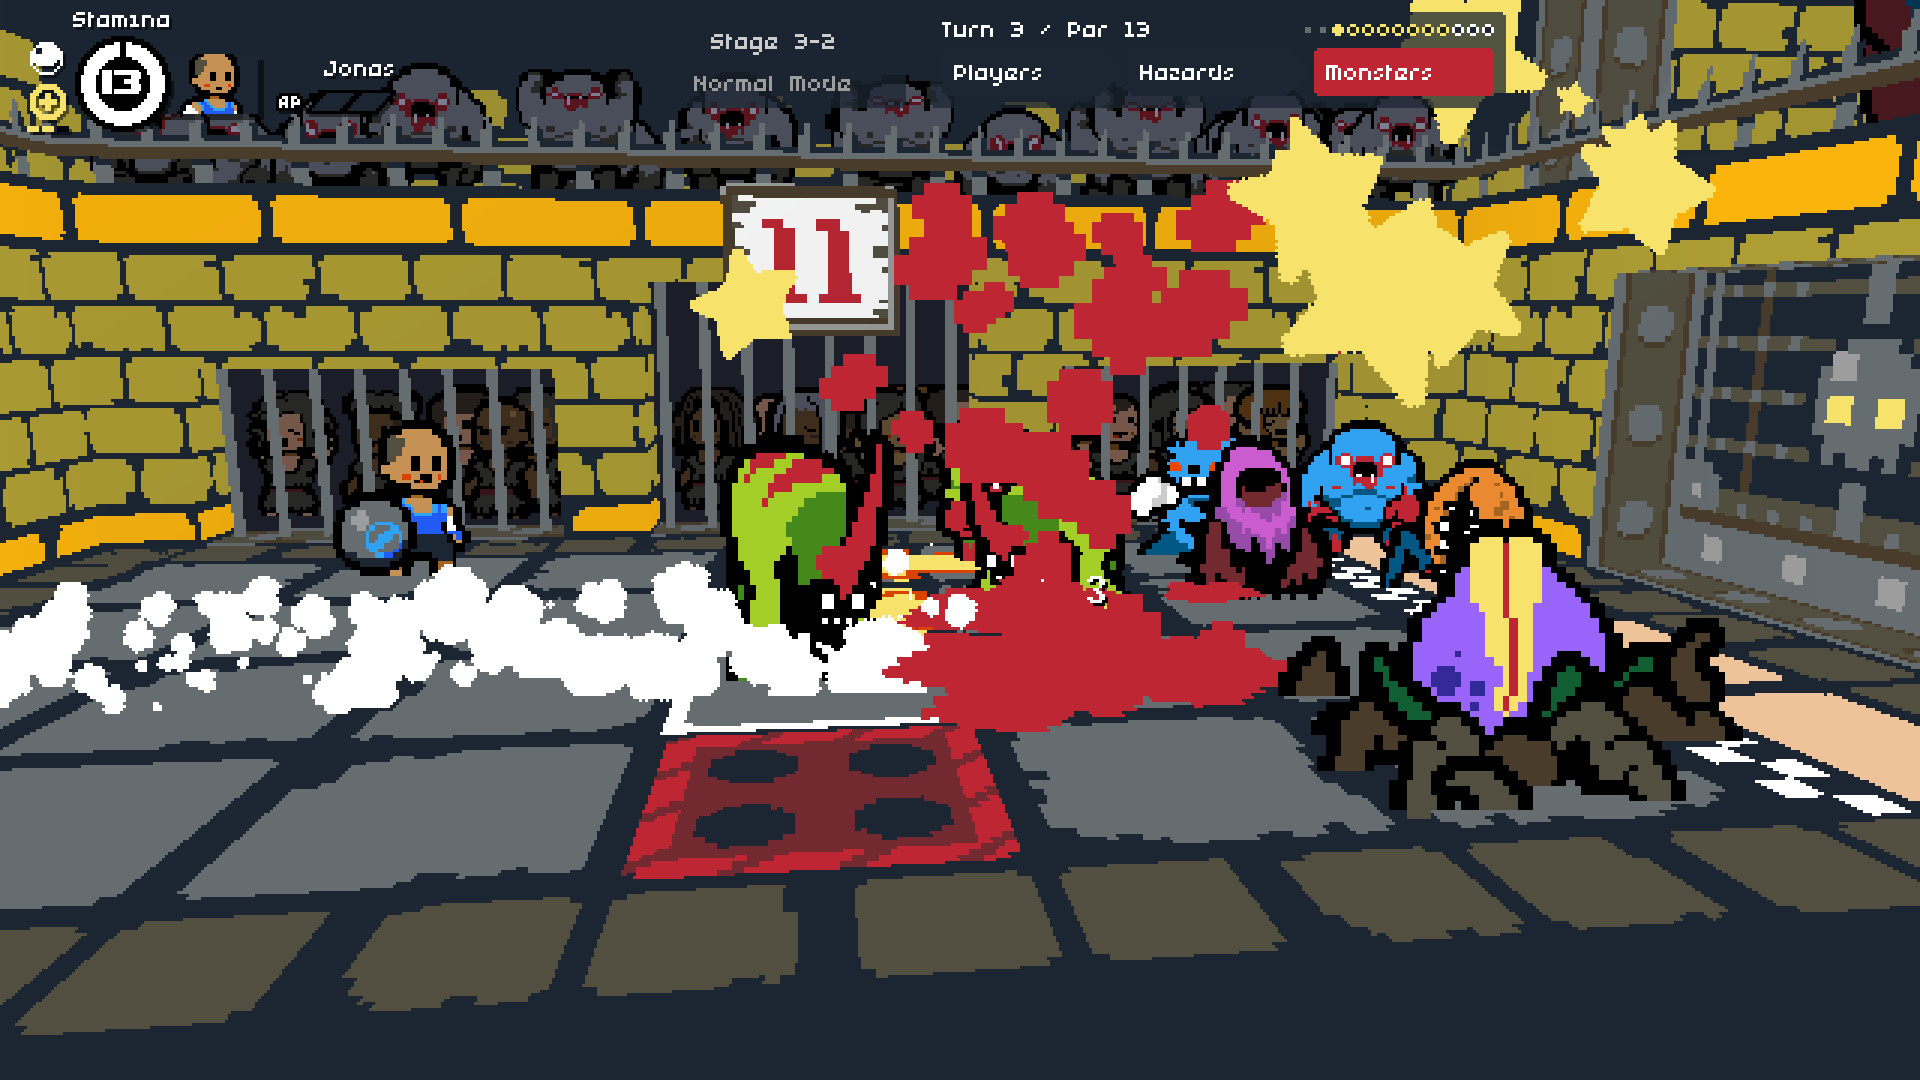 Dungeon Deathball Free Download